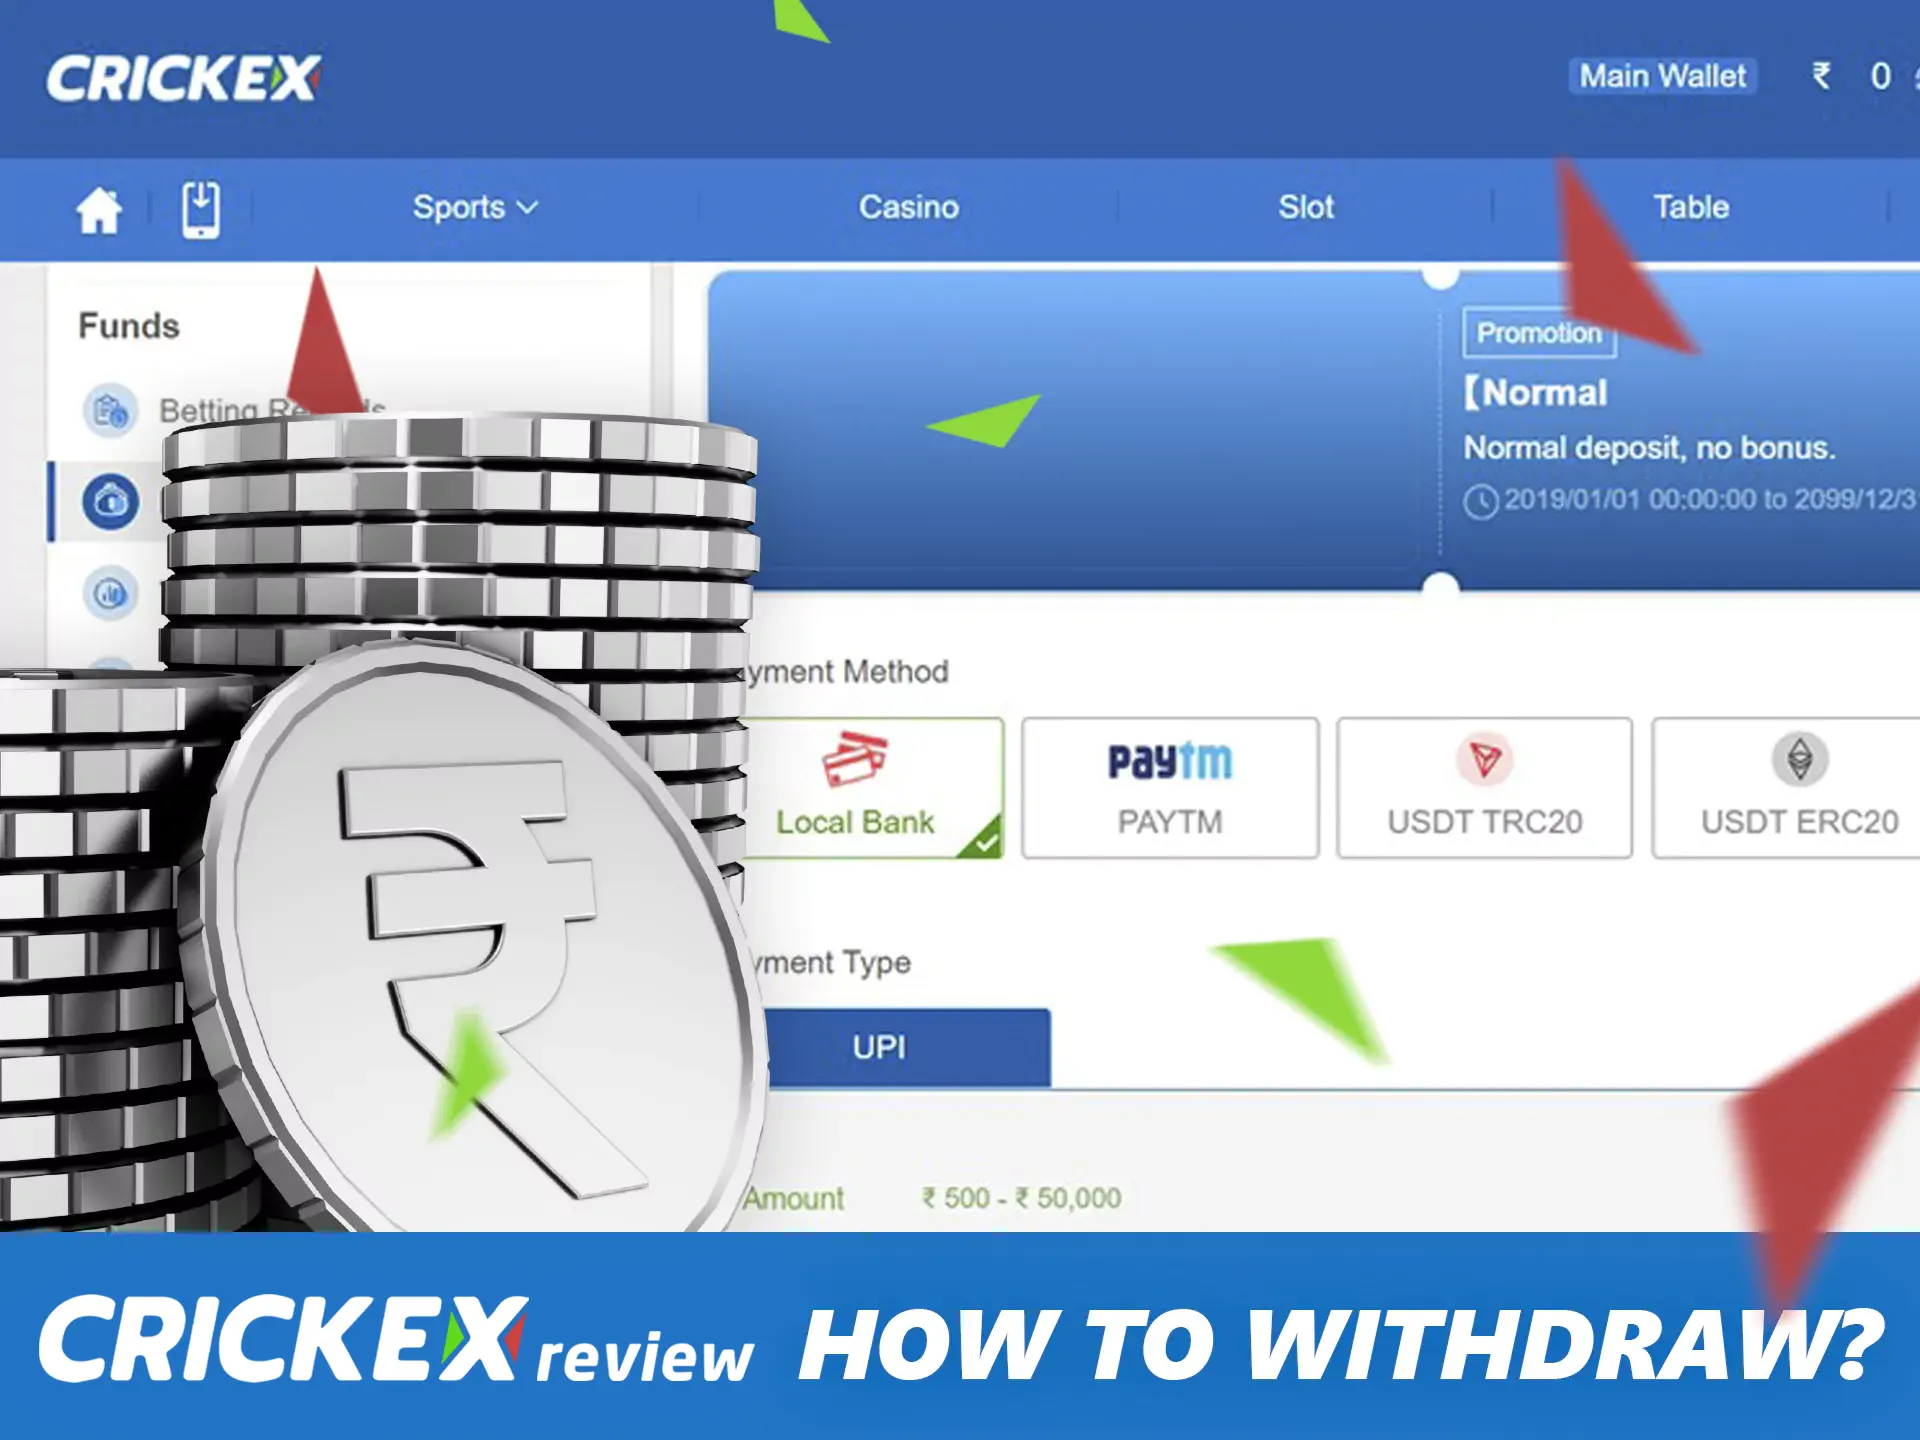 To withdraw from Crickex you need to verify your account.